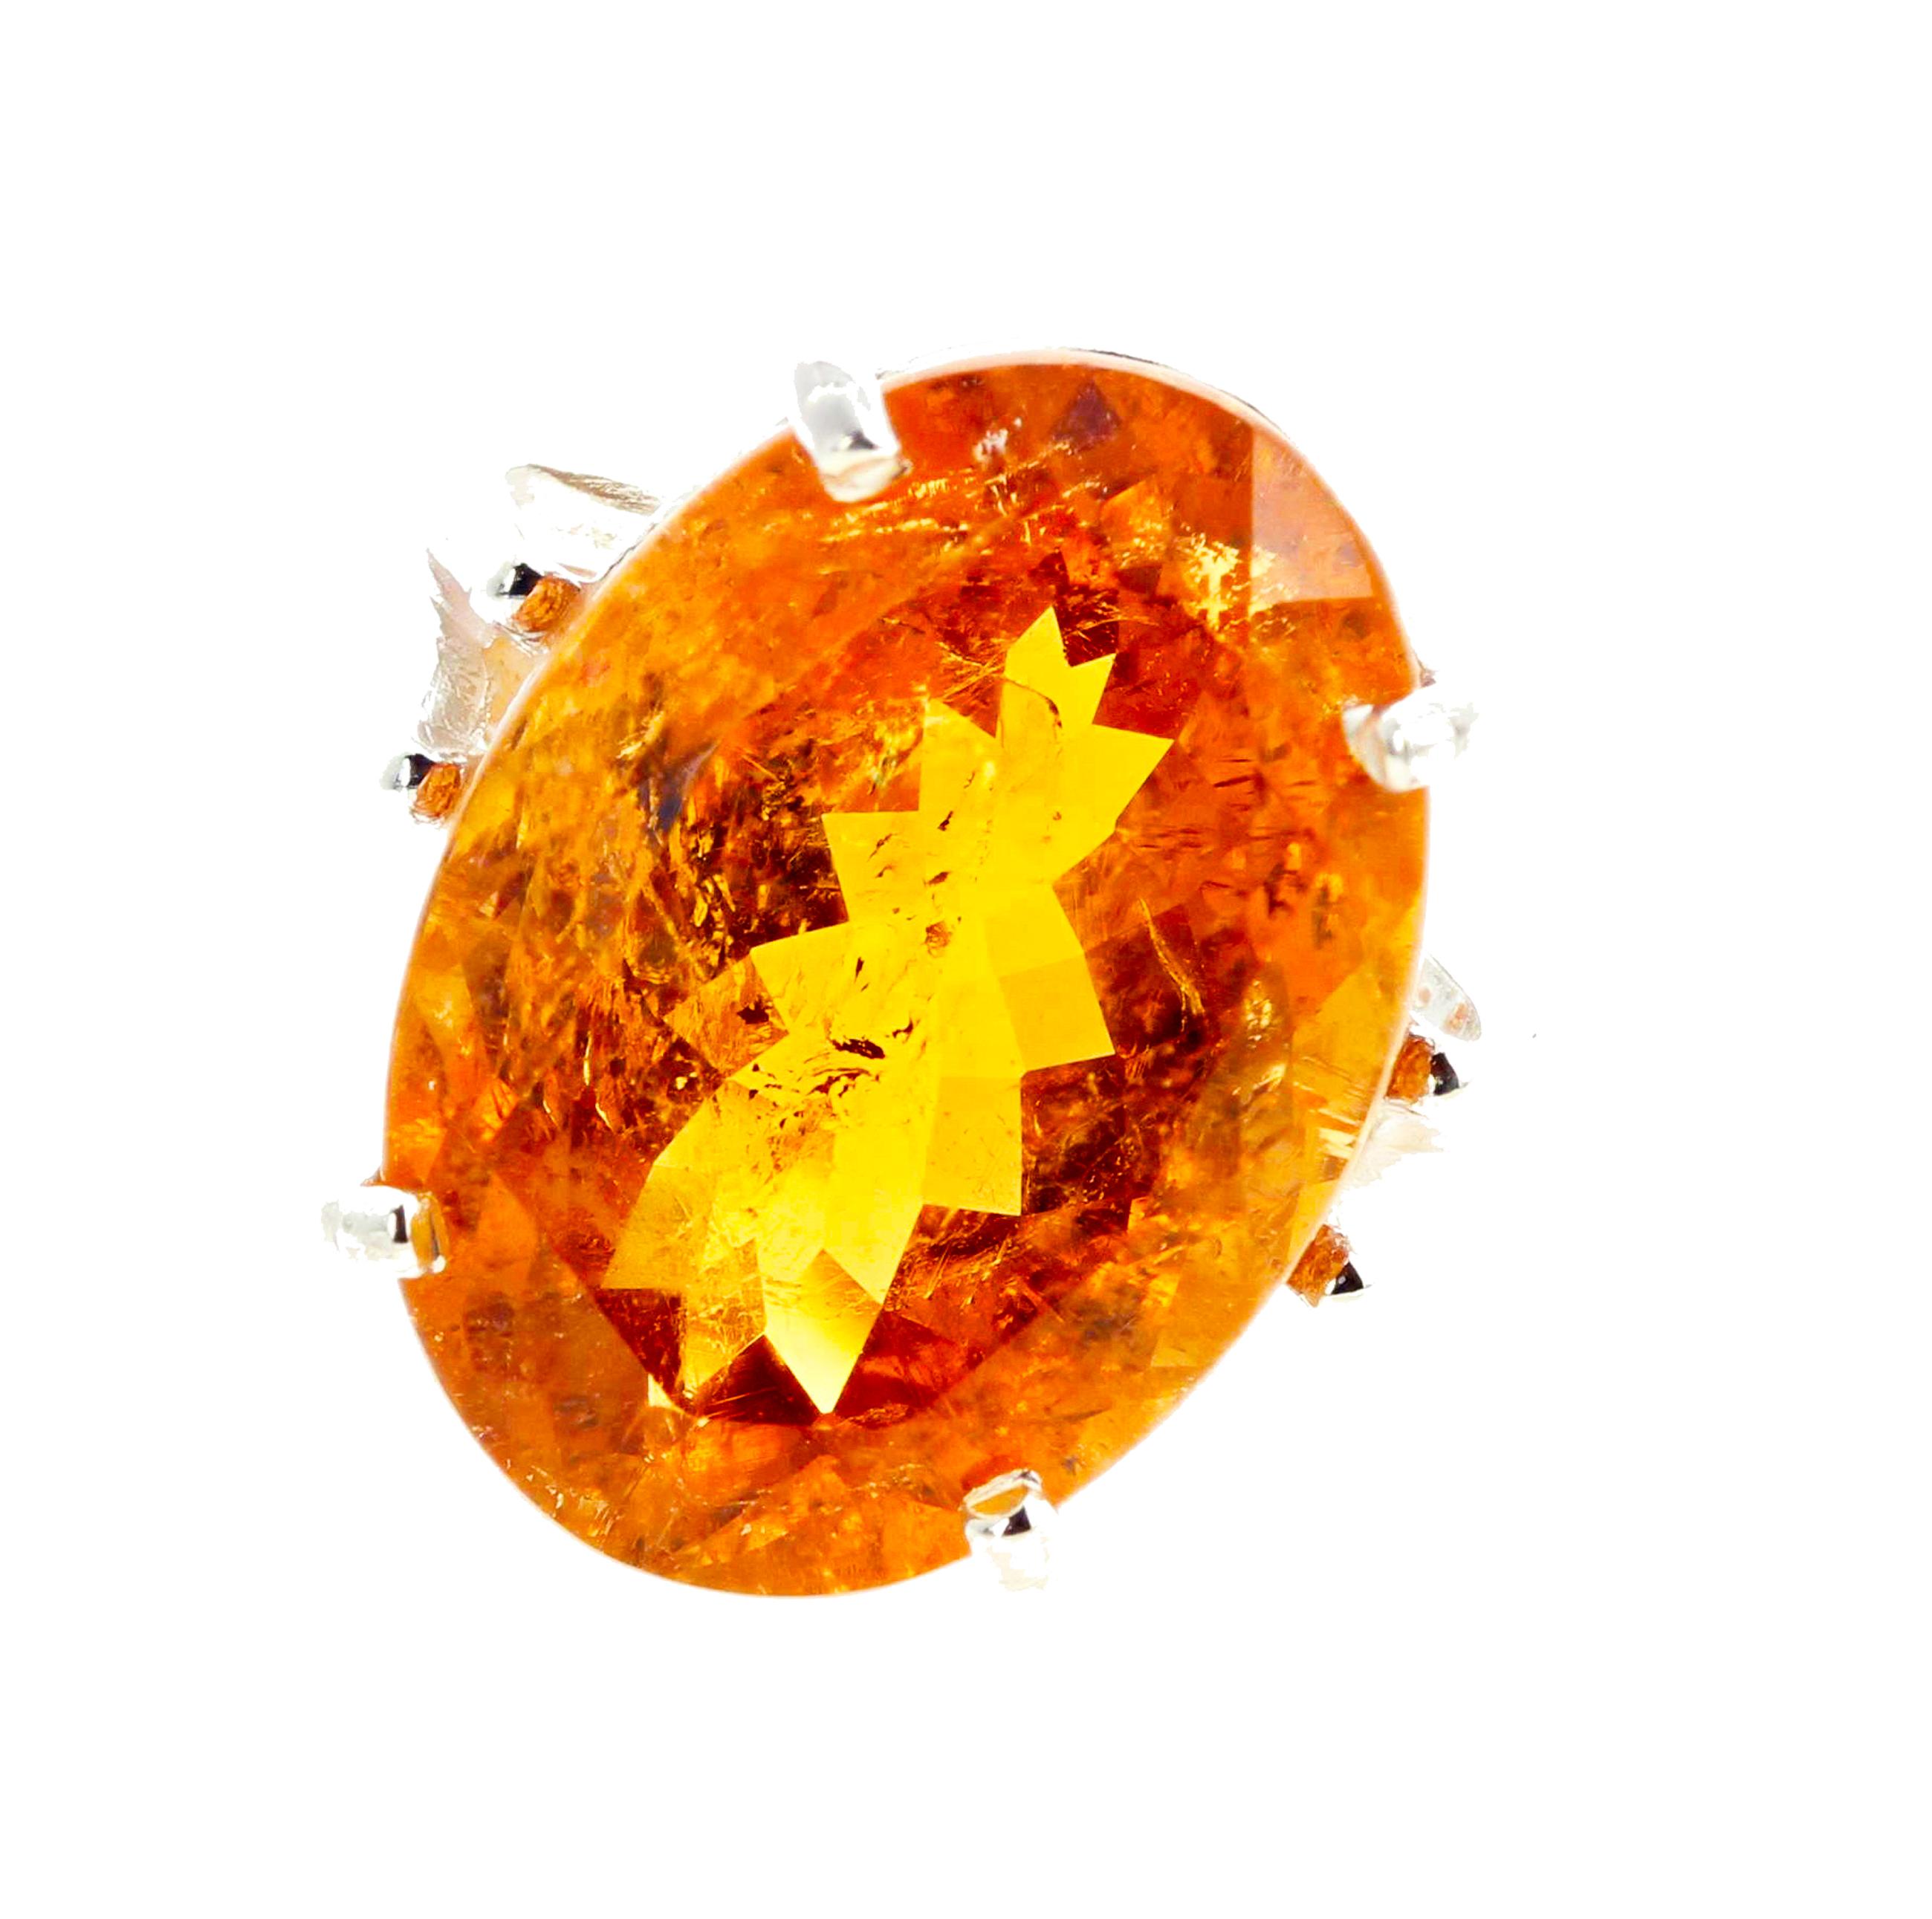 Glittering huge 16.25 carat rare orangy oval sparkling Tourmaline with goldy flecks of light (19.3 mm x 14 mm) set in a lovely sterling silver ring size 7 sizable for free.  The beauty of the quality of the stone is visible through the photograph